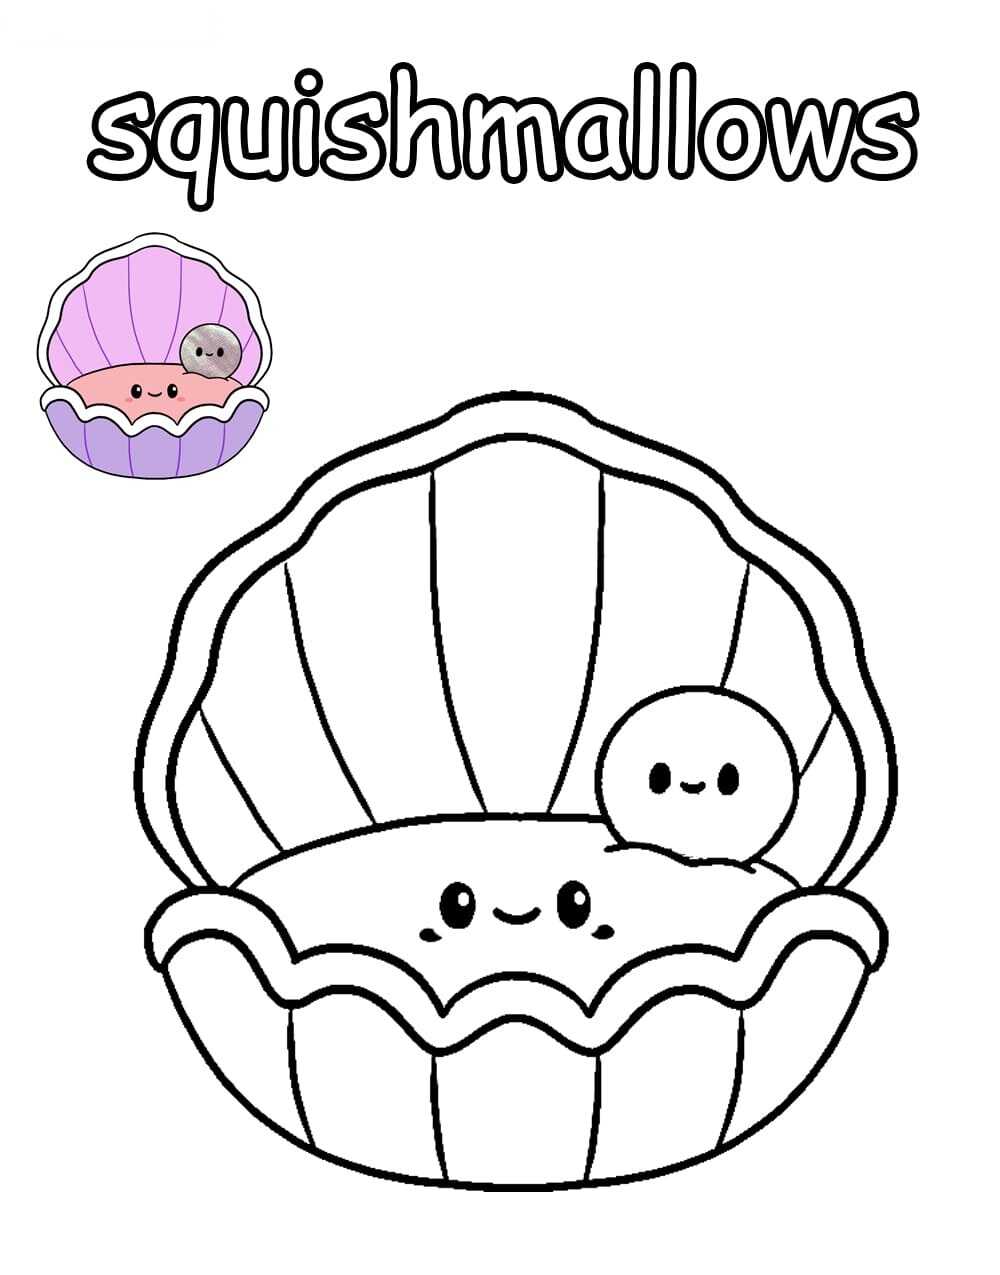 Squishmallow Pearl in the Shell Coloring Pages Squishmallow Coloring